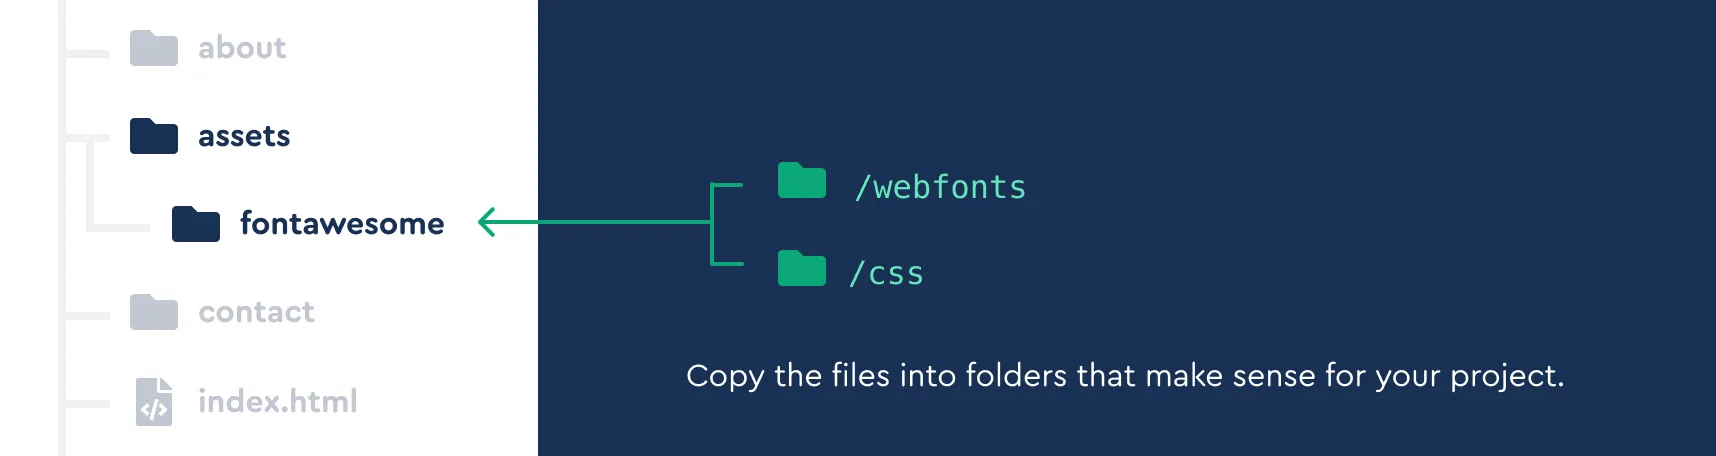 Copy webfonts and CSS assets into your project directories